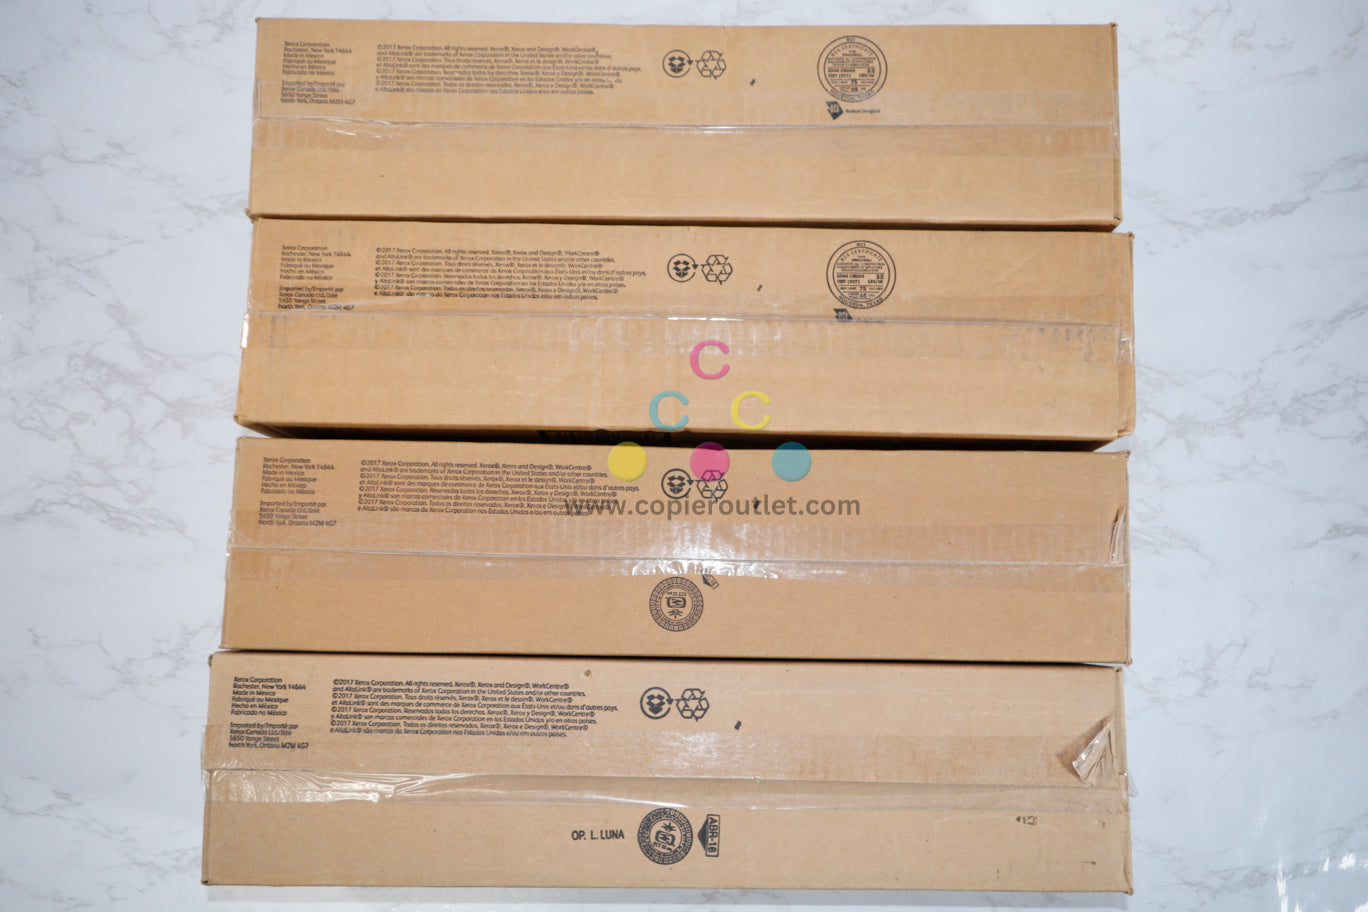 4 New Cosmetic Xerox WorkCentre 7525,7530,7535,7545,7556,7830 Drums 013R00662